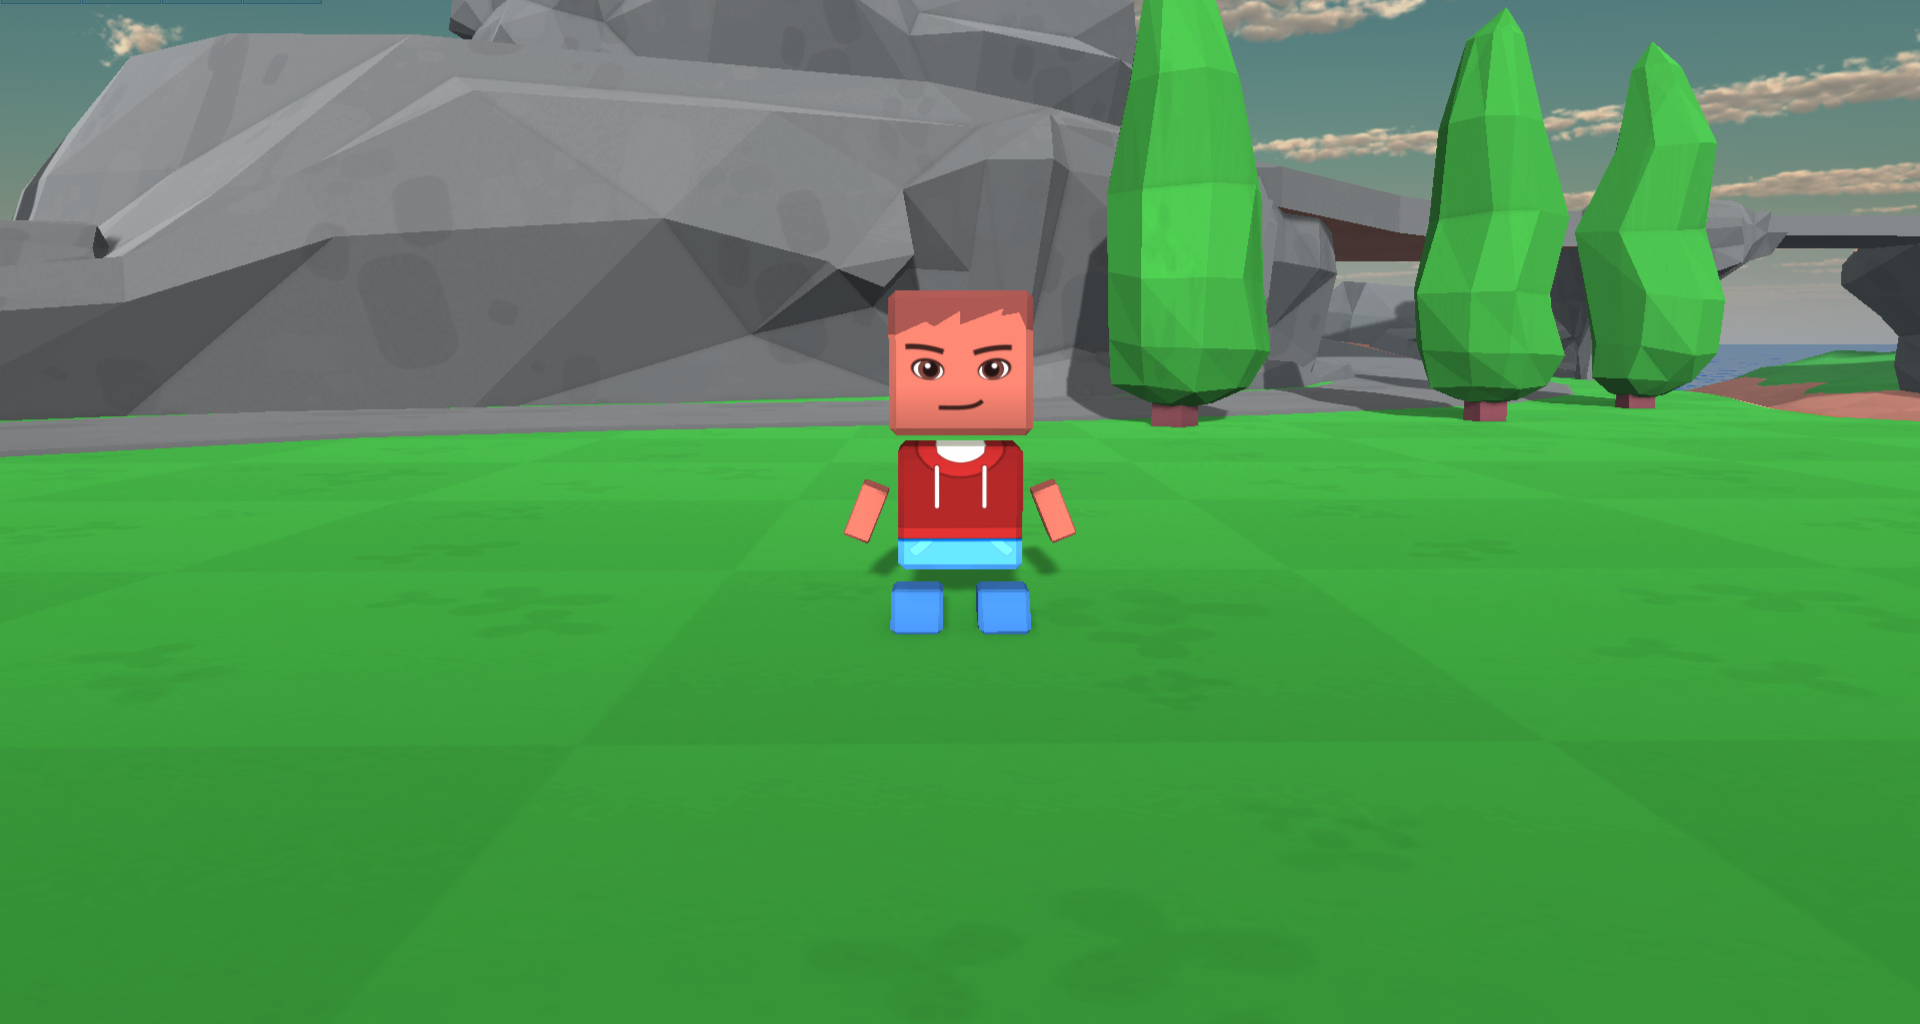 how to make a blockster hold something blocksworld